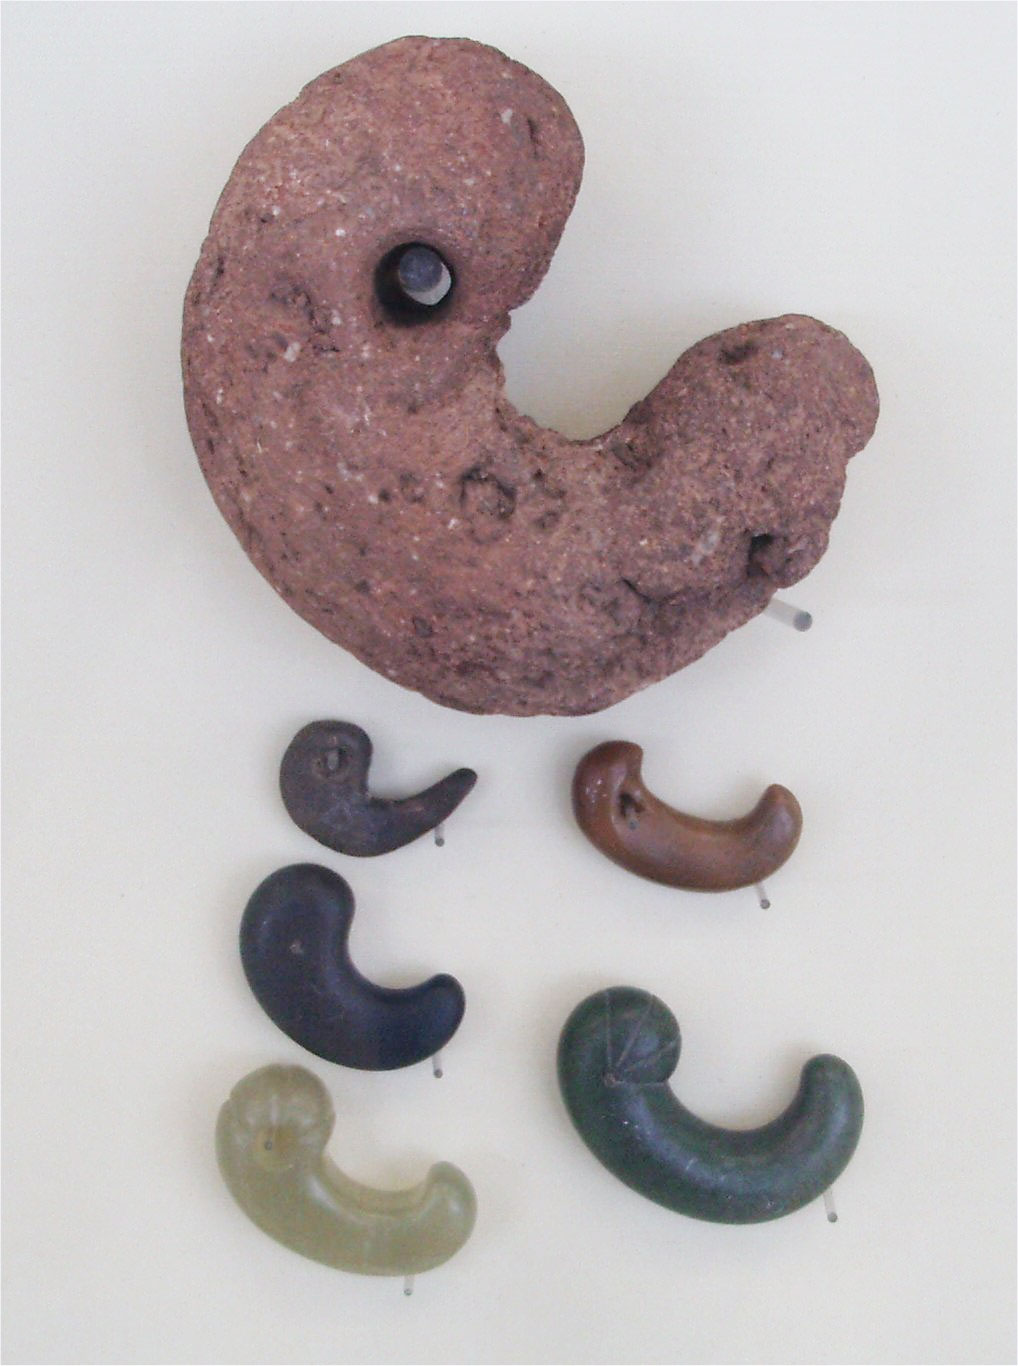 Magatama stones, found across Korea and Japan. Image by Pschemp, licensed under GFDL CC-BY-SA-3.0-migrated CC-BY-2.5.